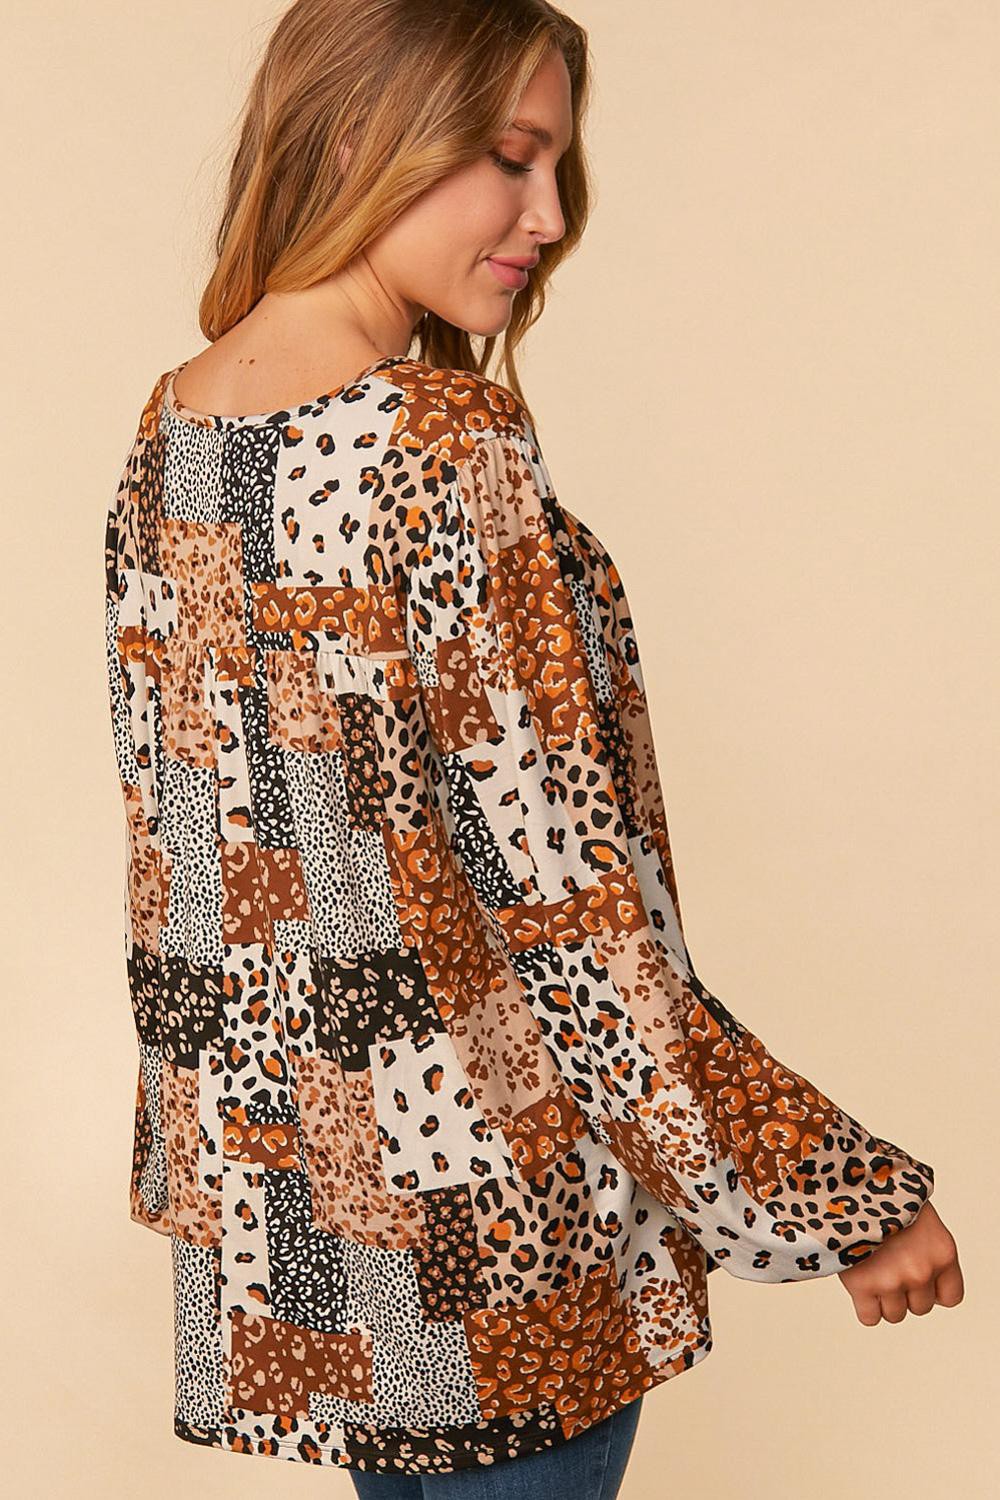 Leopard Patchwork Front Tie String Top-Mulberry Skies